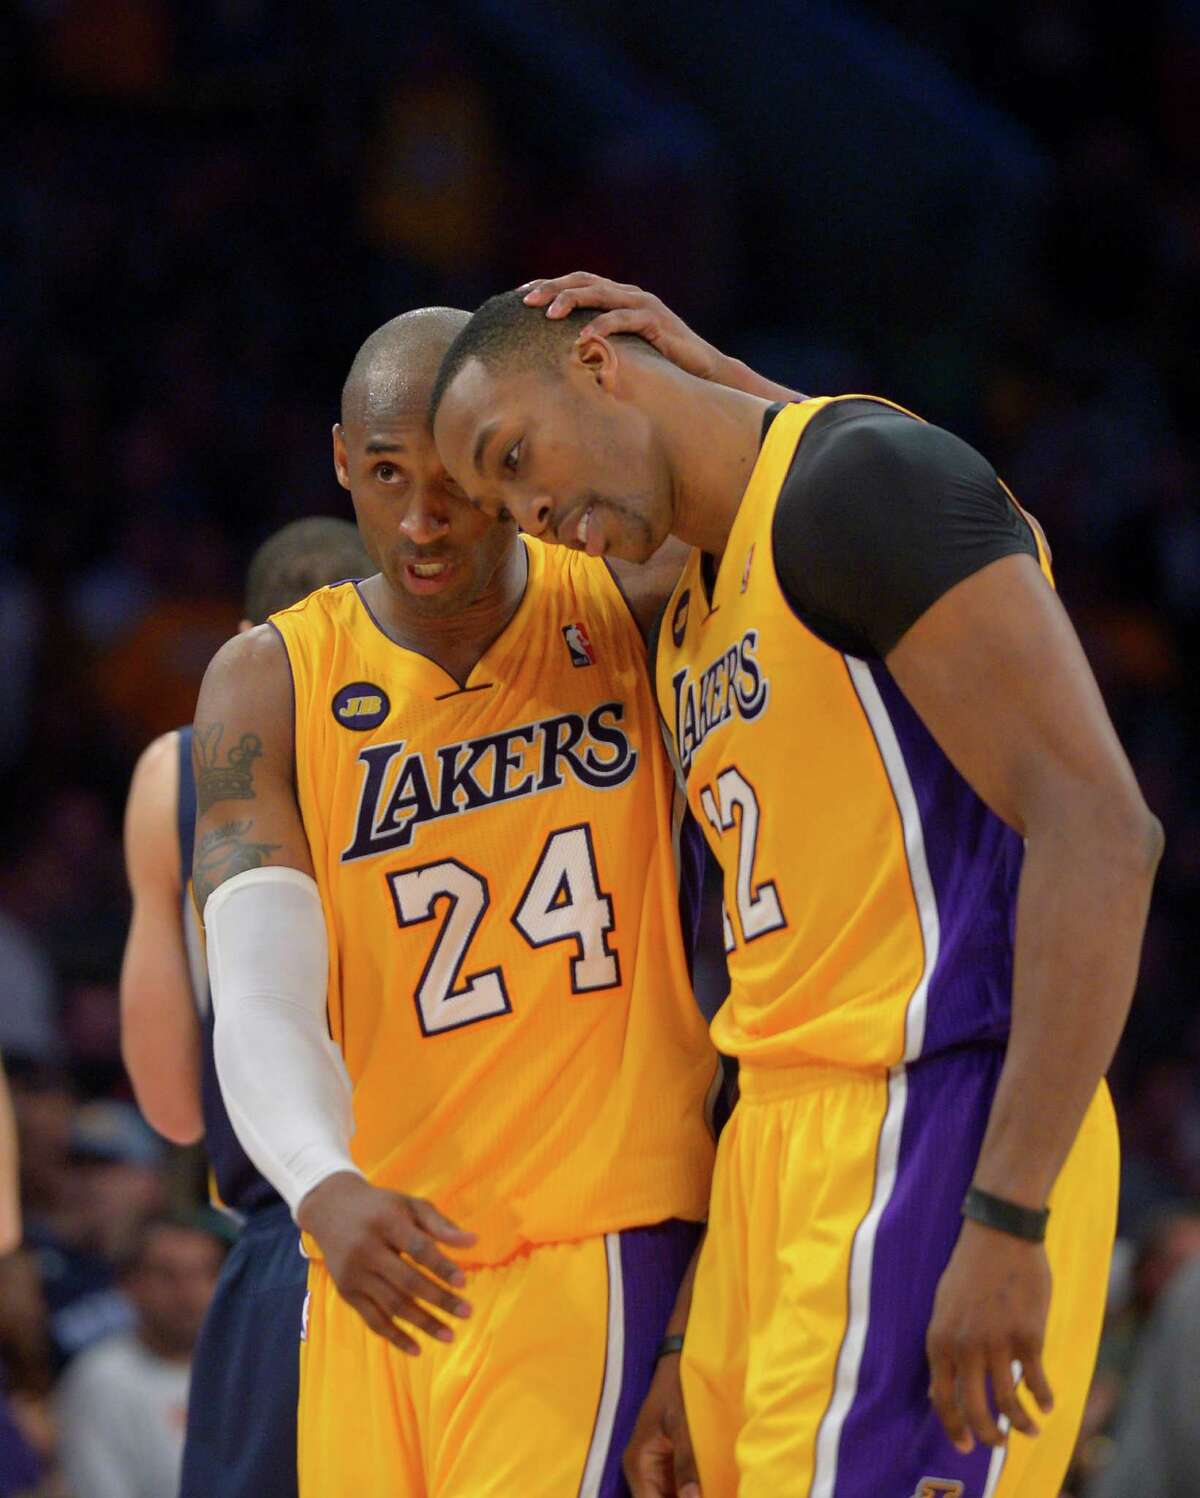 Kobe Bryant/Dwight Howard, Lakers Did anyone think an alliance between the ruthless Black Mamba and the perpetually grinning Howard stood a chance? Bryant did little to hide his dissatisfaction with Howard and owner Jim Buss piled on after Howard went to Houston, saying the big man "was never really a Laker. He was just passing through."